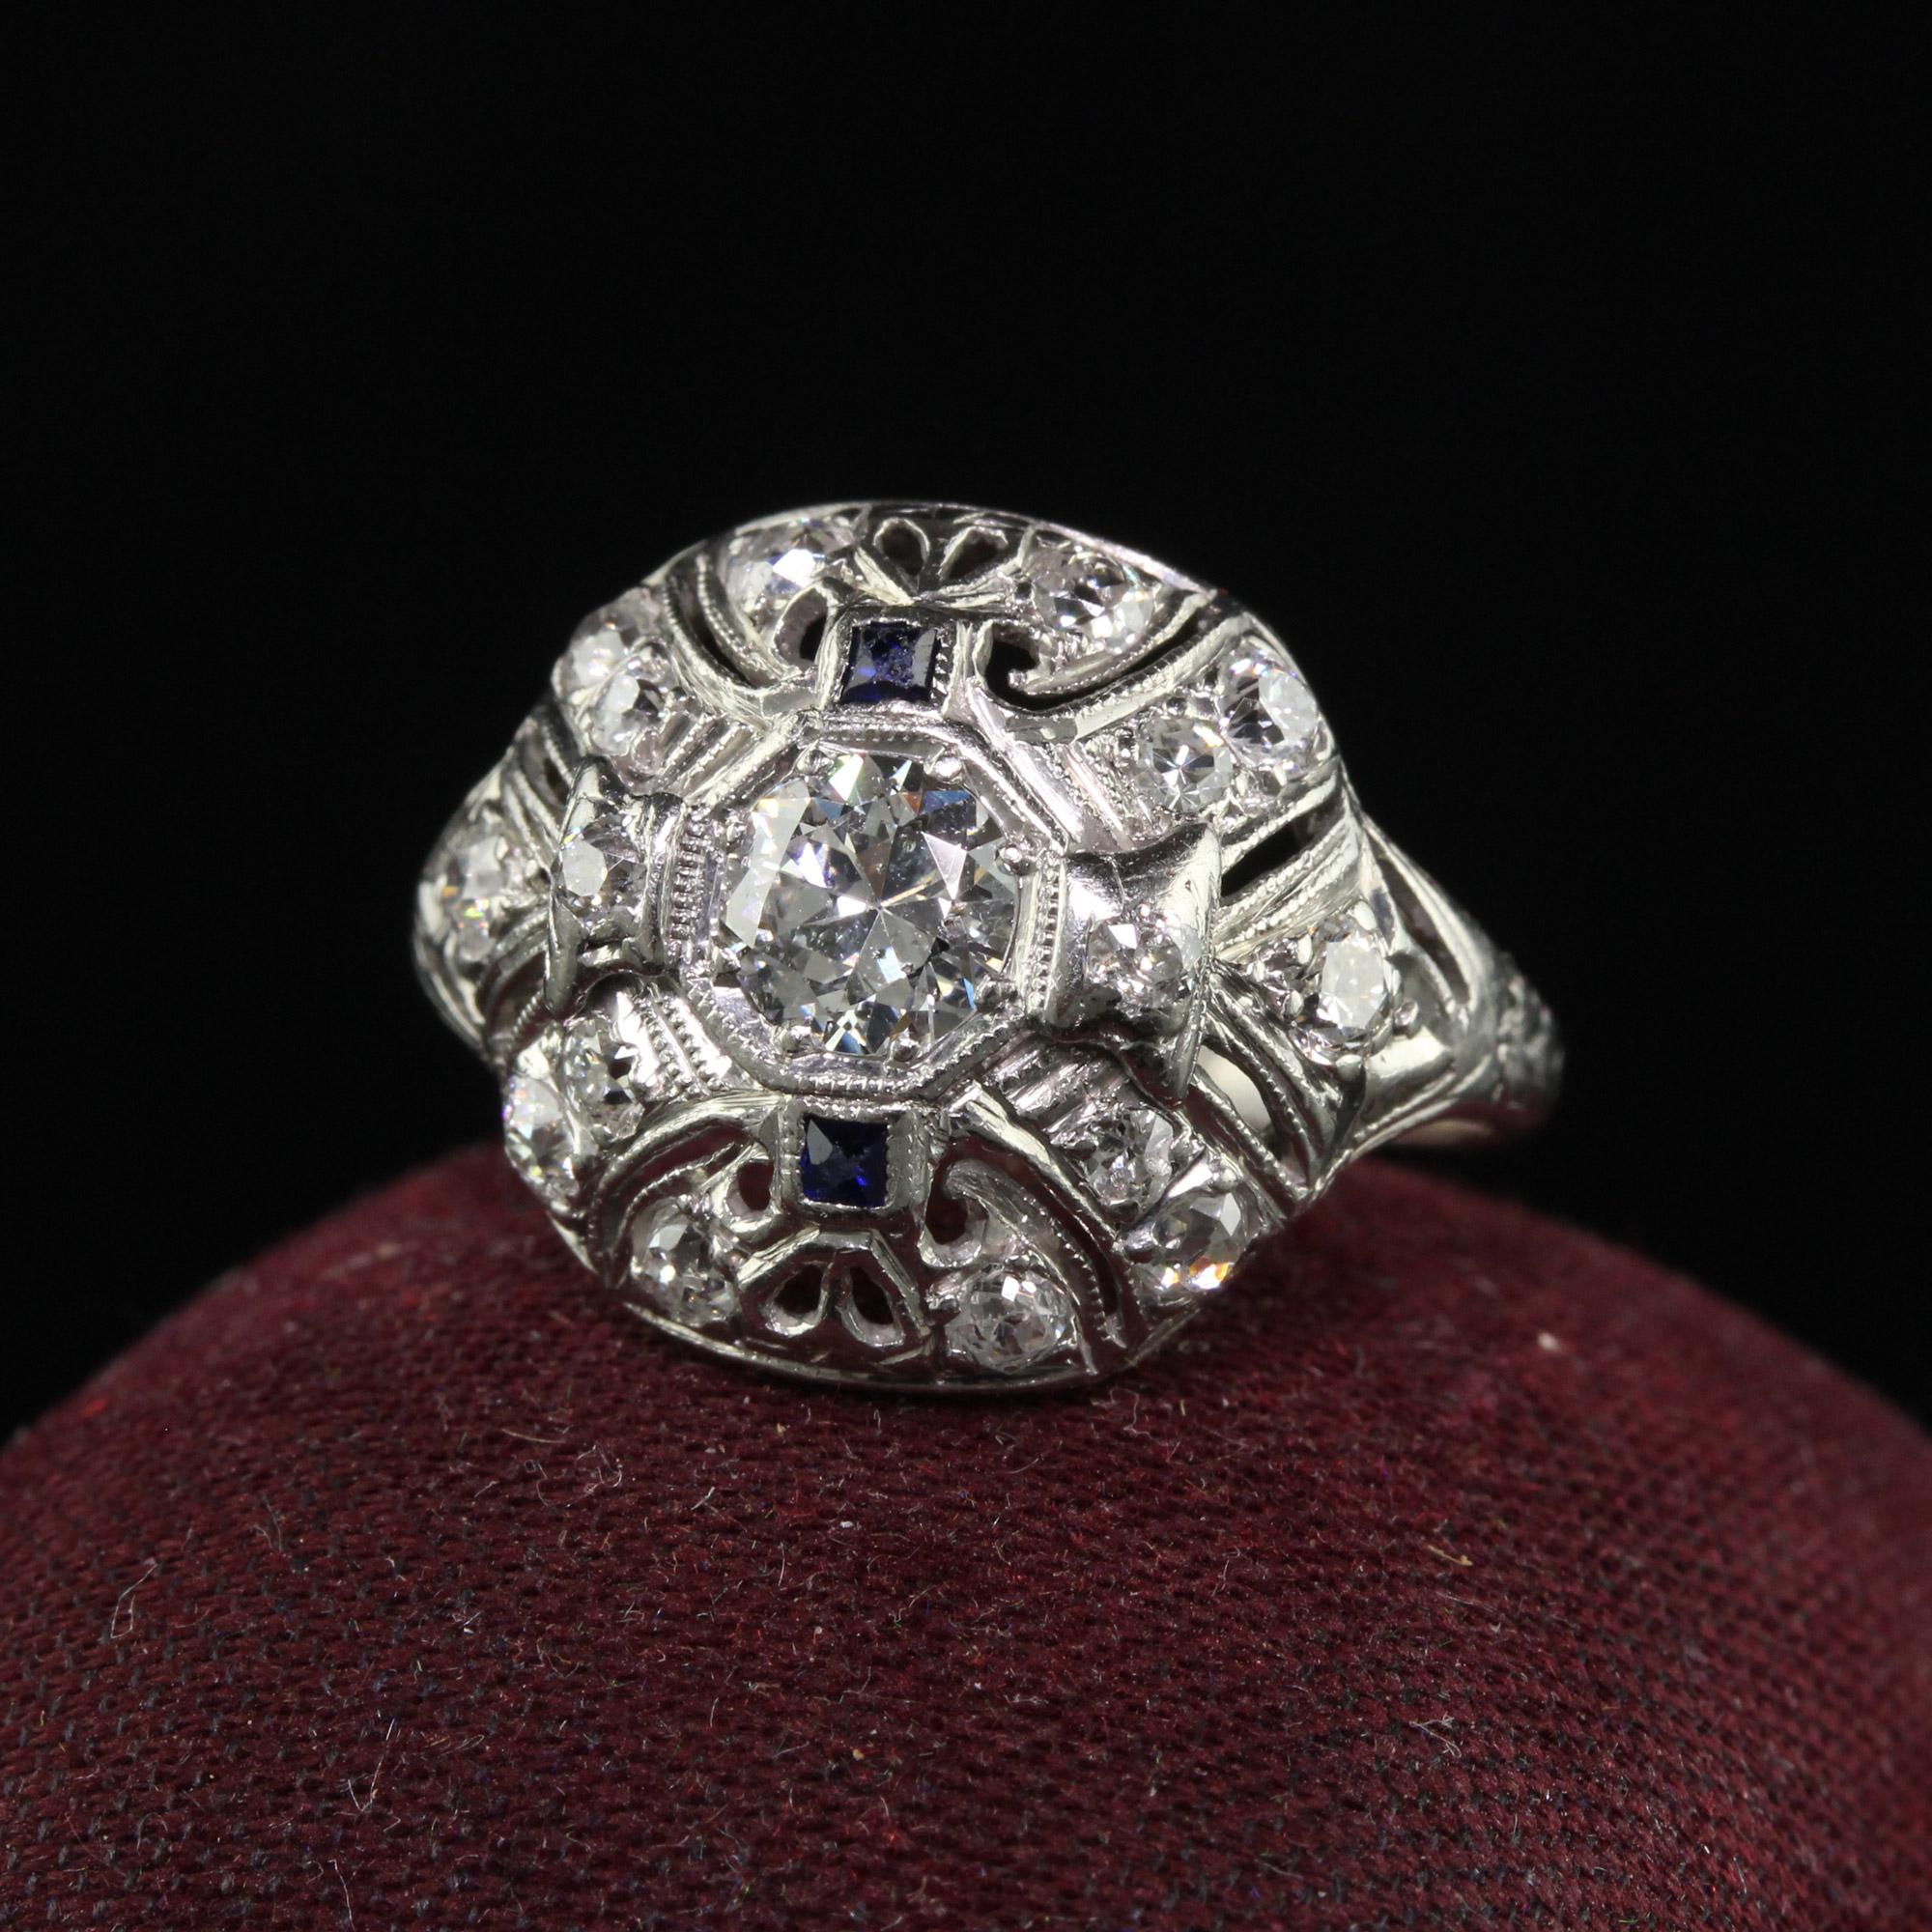 Beautiful Antique Art Deco Platinum Old European Cut Diamond and Sapphire Cocktail Ring. This beautiful ring is crafted in platinum. The ring holds old European cut diamonds that are set in a filigree mounting. The ring is in great condition and